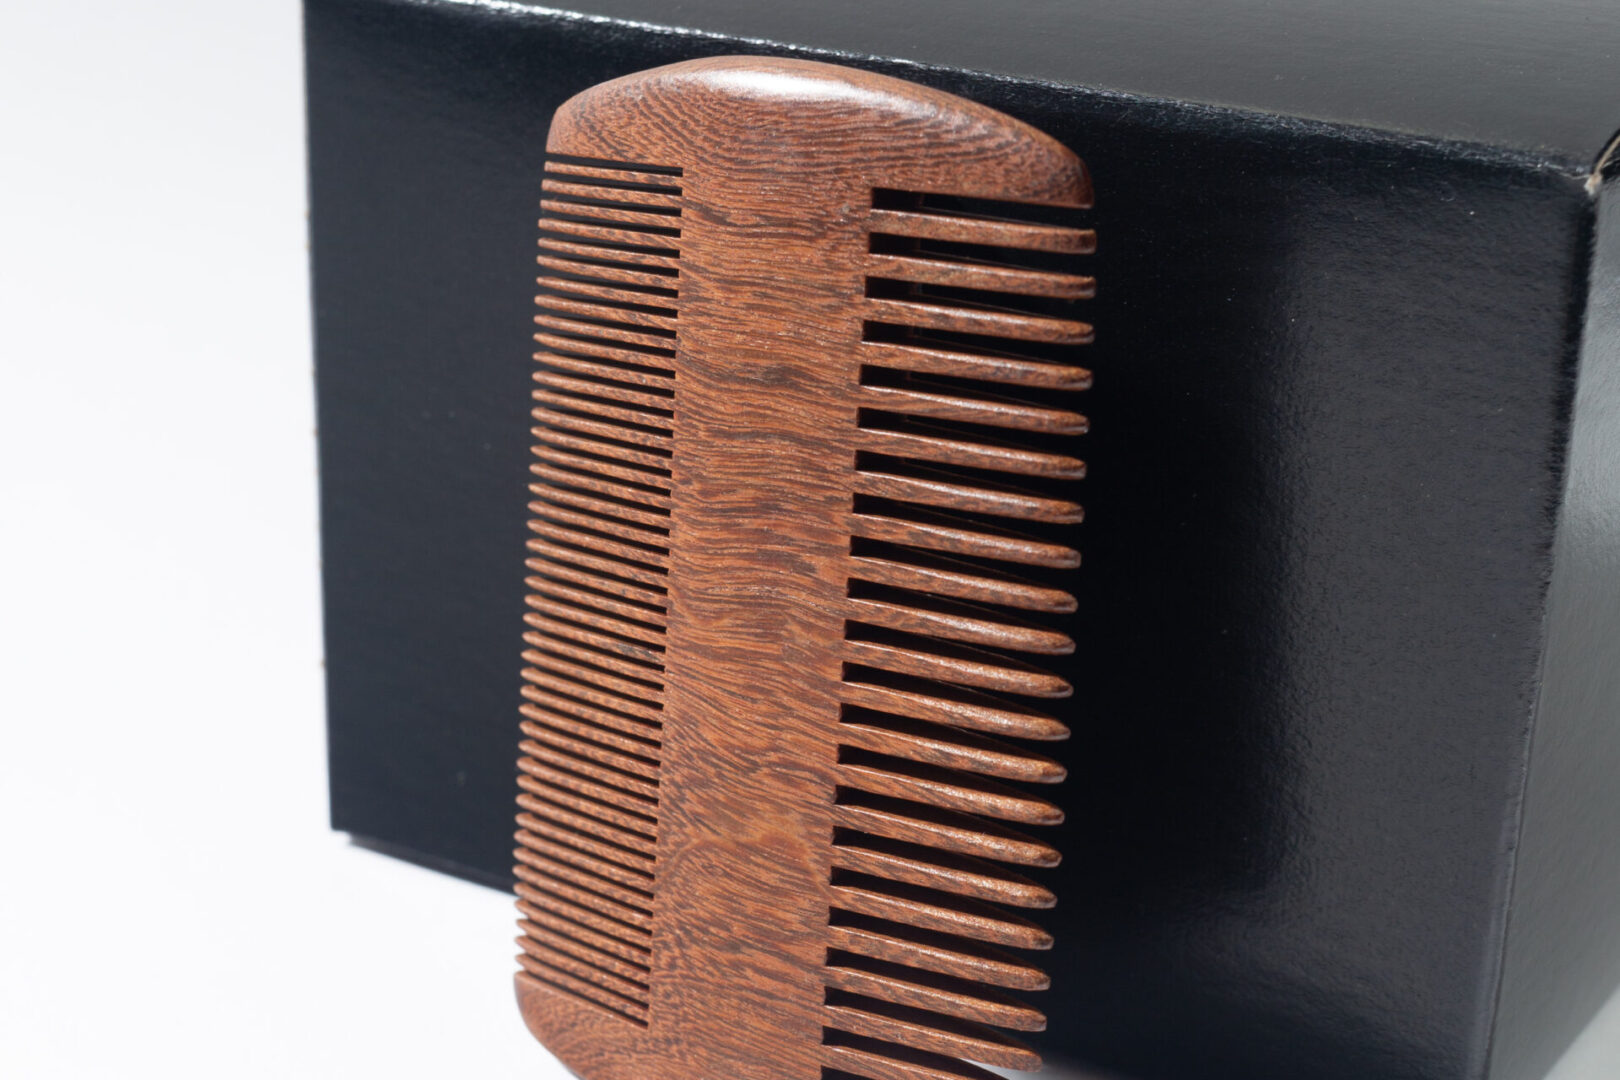 A wooden comb is sitting on top of a box.